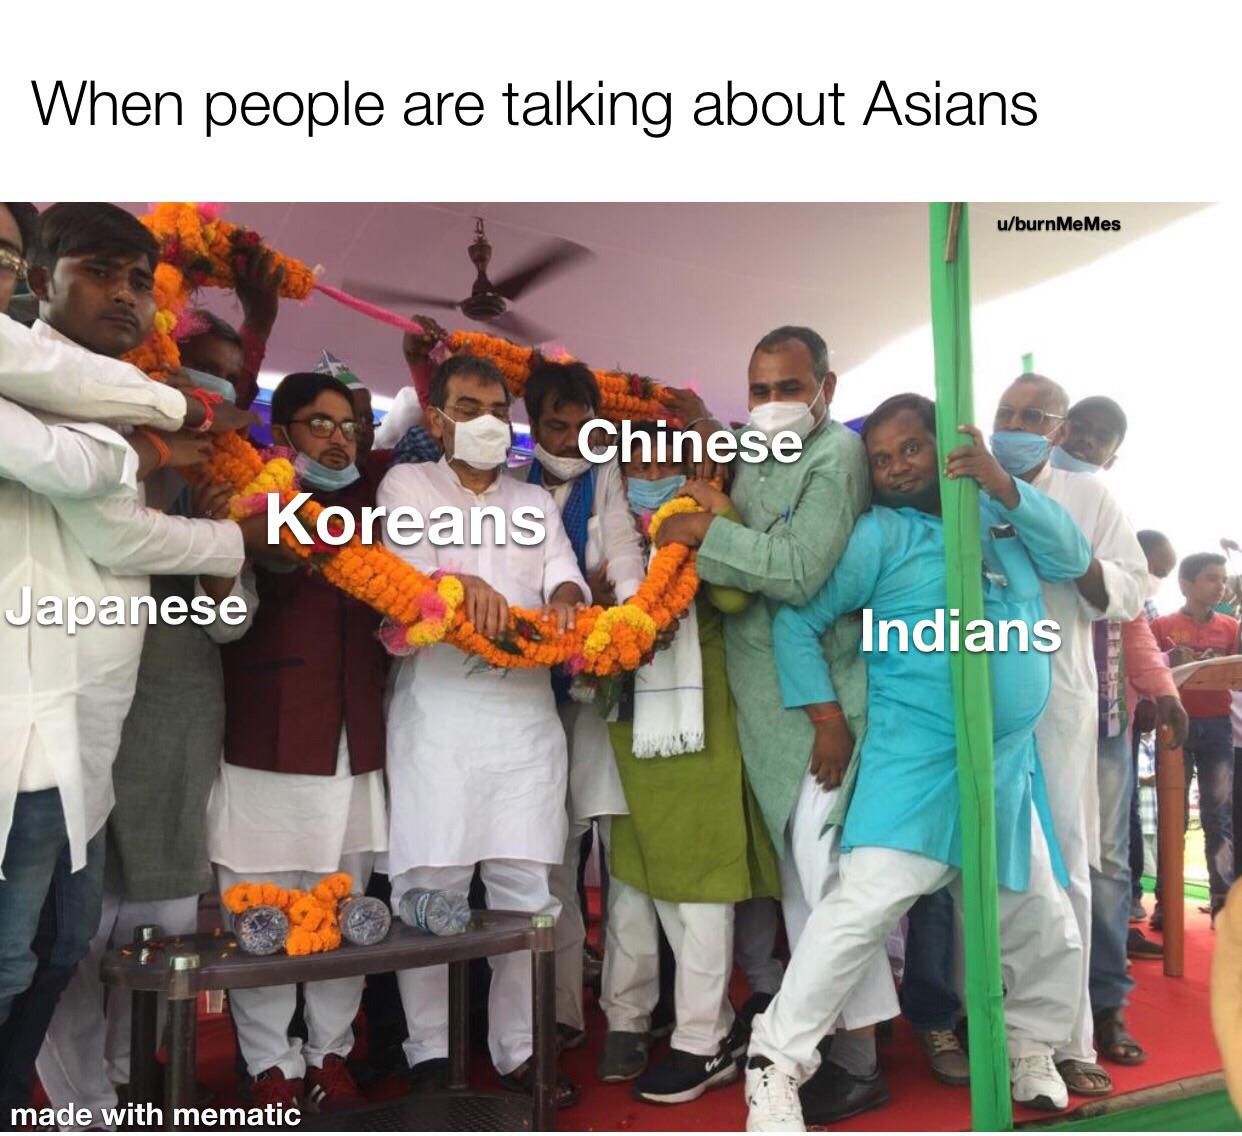 Yes India is a part of Asia